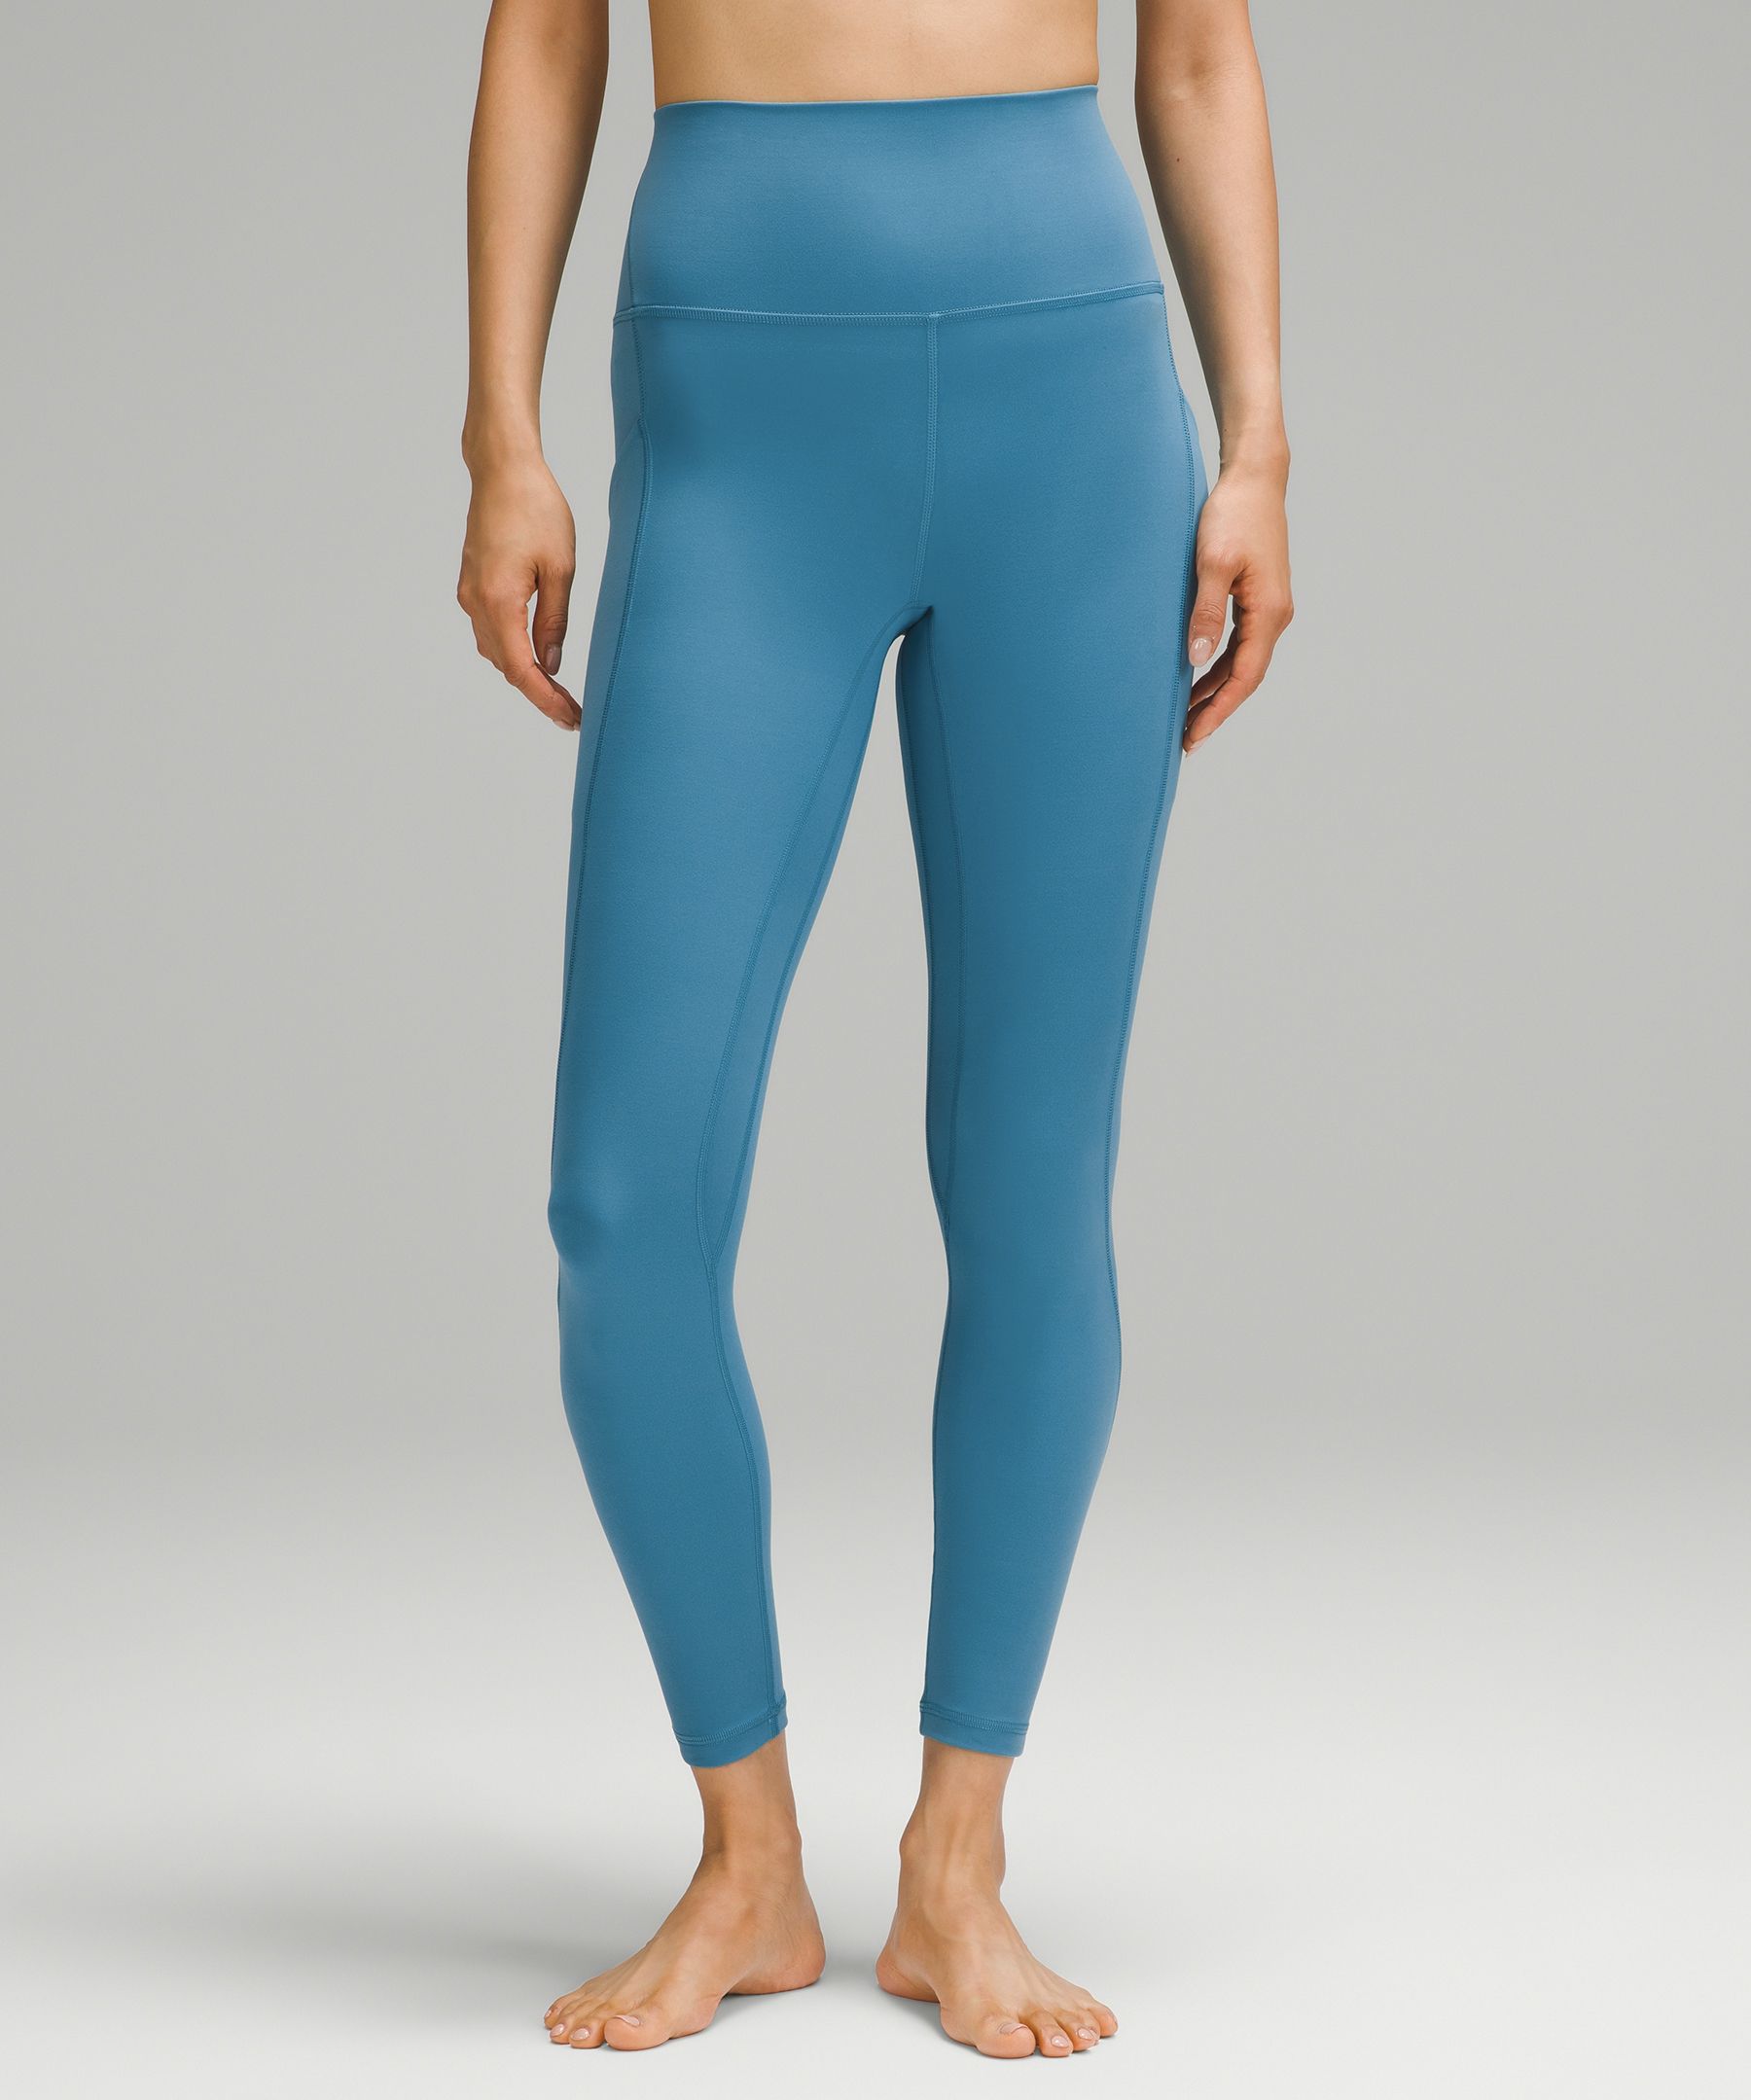 lululemon Align™ High-Rise Pant with Pockets 24 *Asia Fit